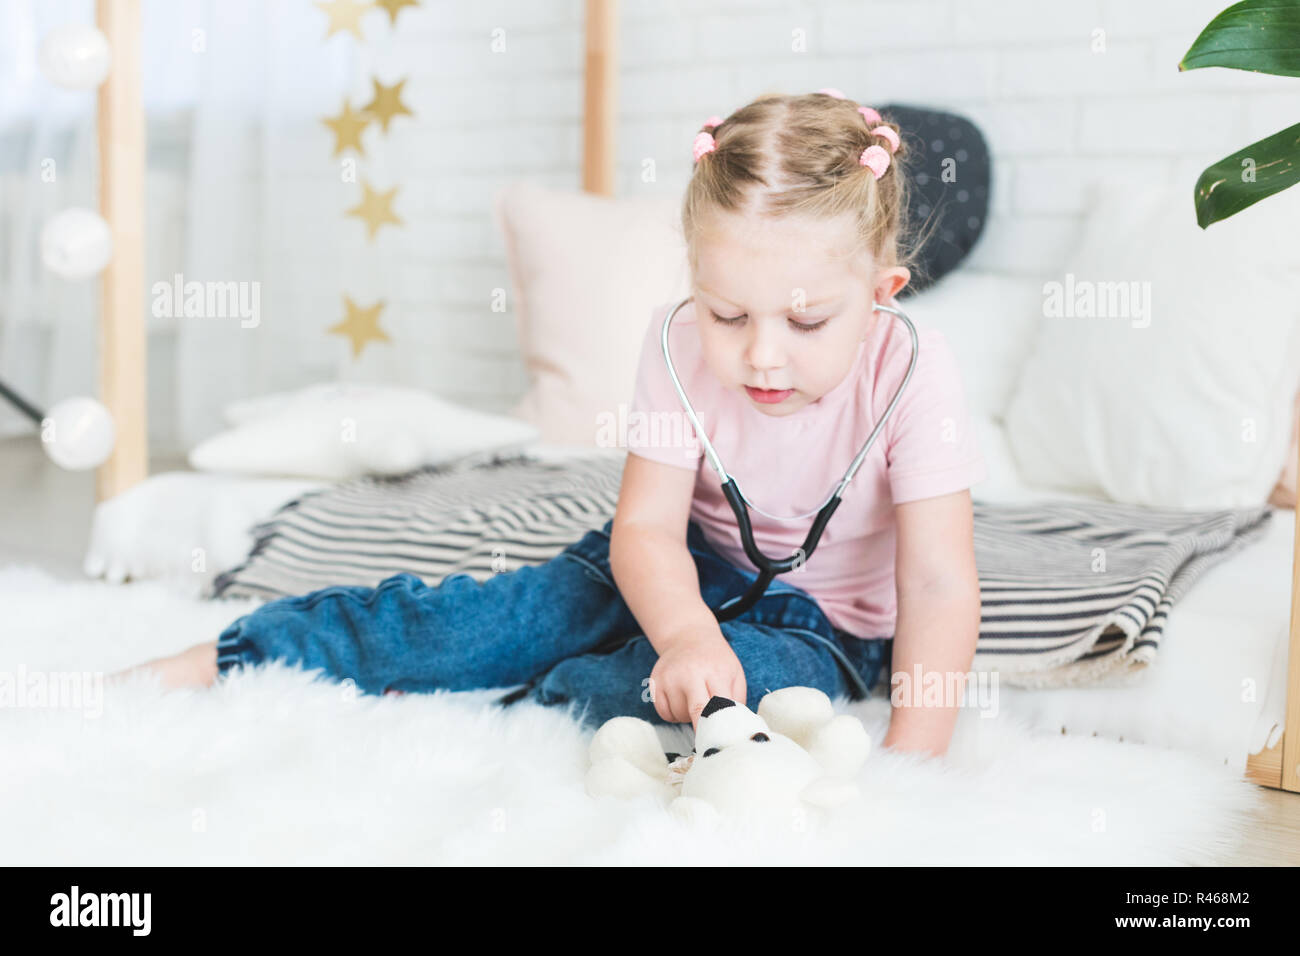 Cute little girl sitting on the bed and playing doctor with stethoscope and Teddy Bear. Stock Photo